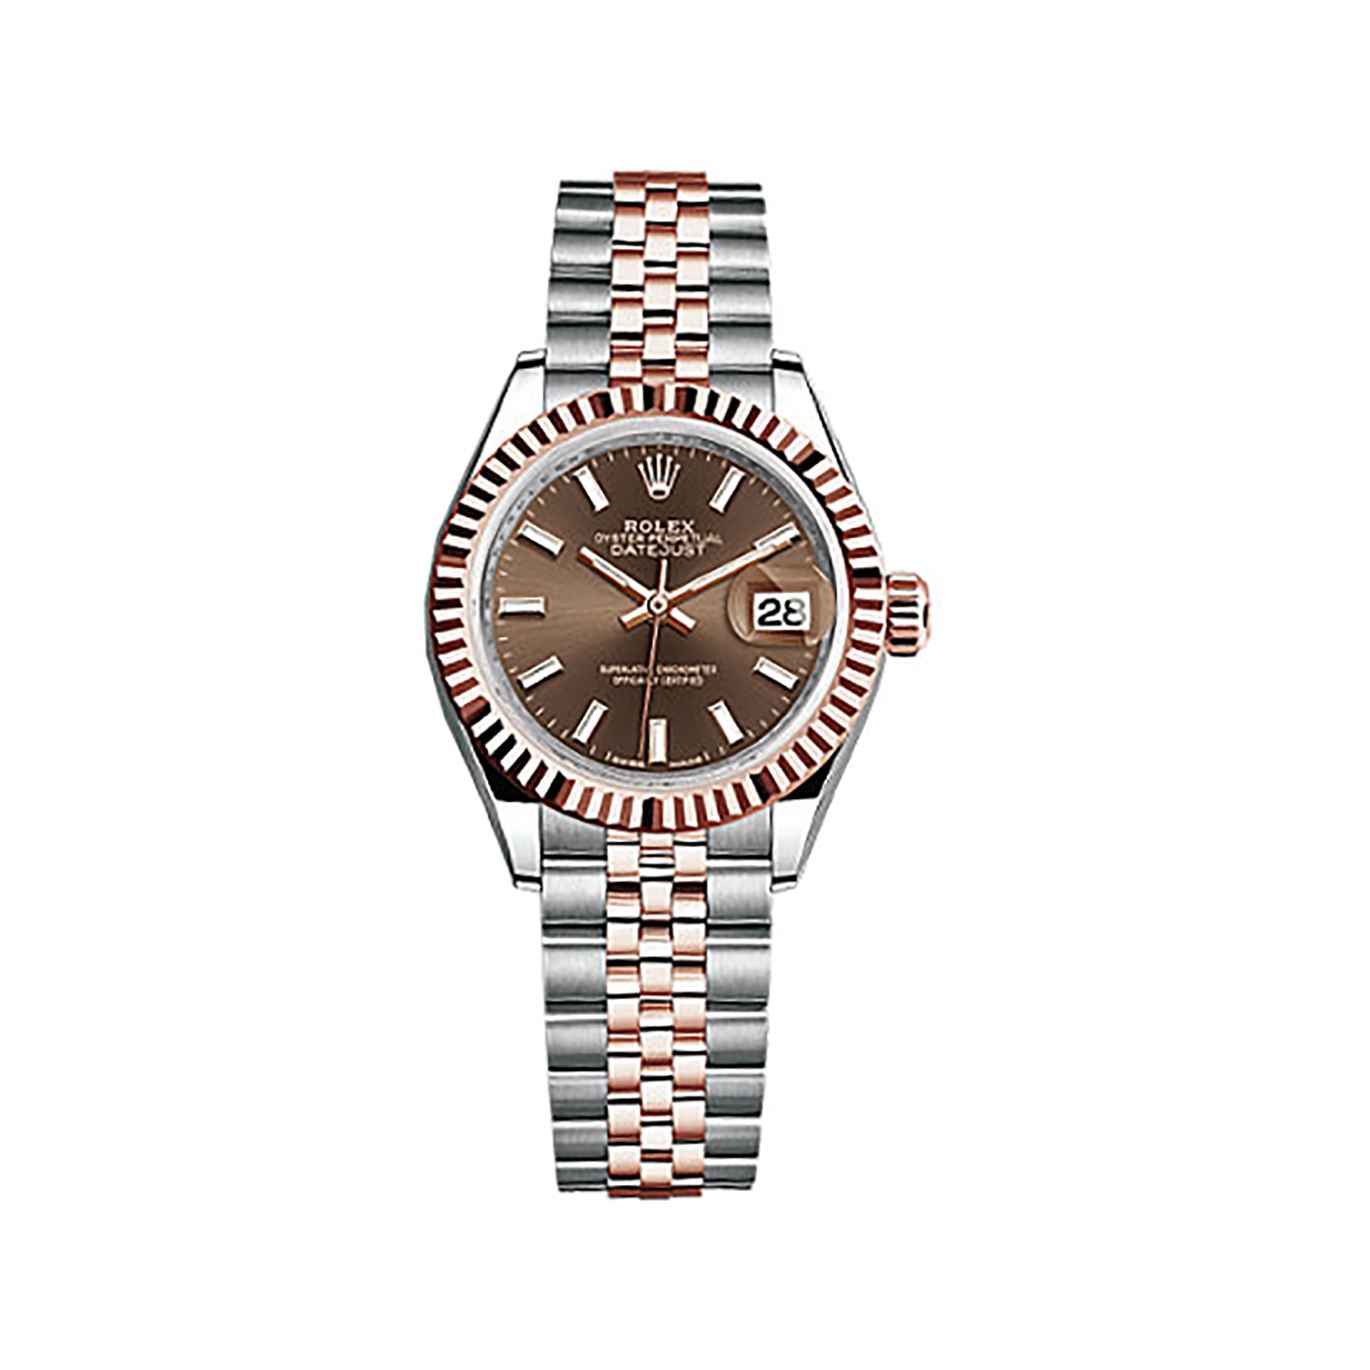 Lady-Datejust 28 279171 Rose Gold & Stainless Steel Watch (Chocolate)